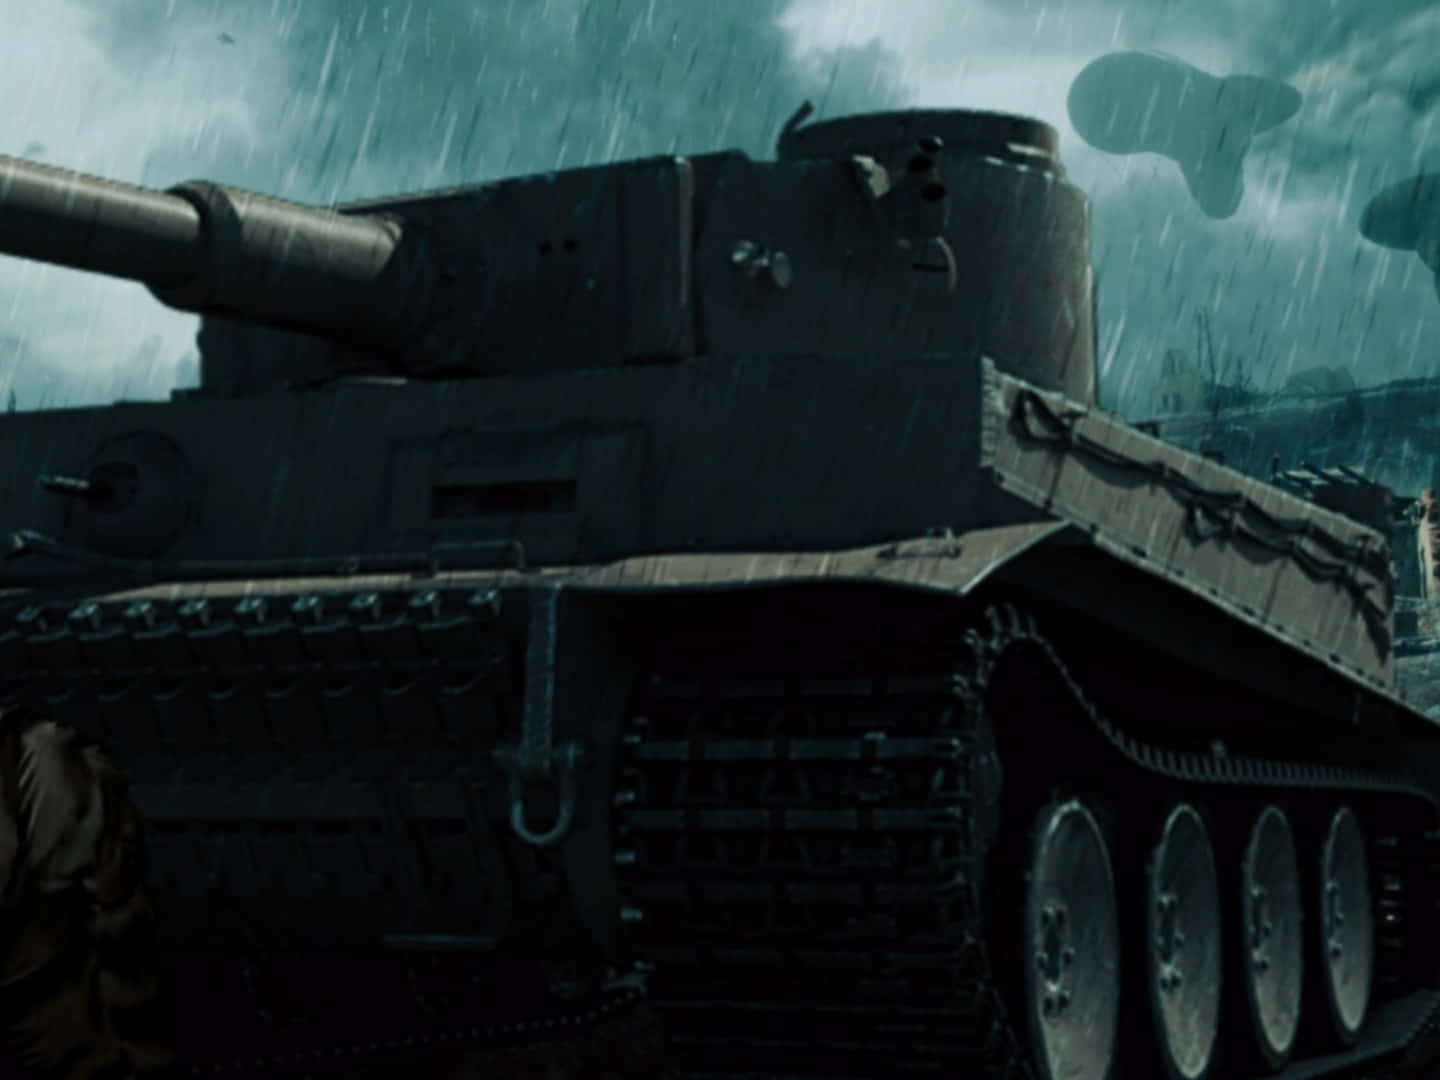 "A Powerful Tank Takes Aim Ready to Take on All Challenges"